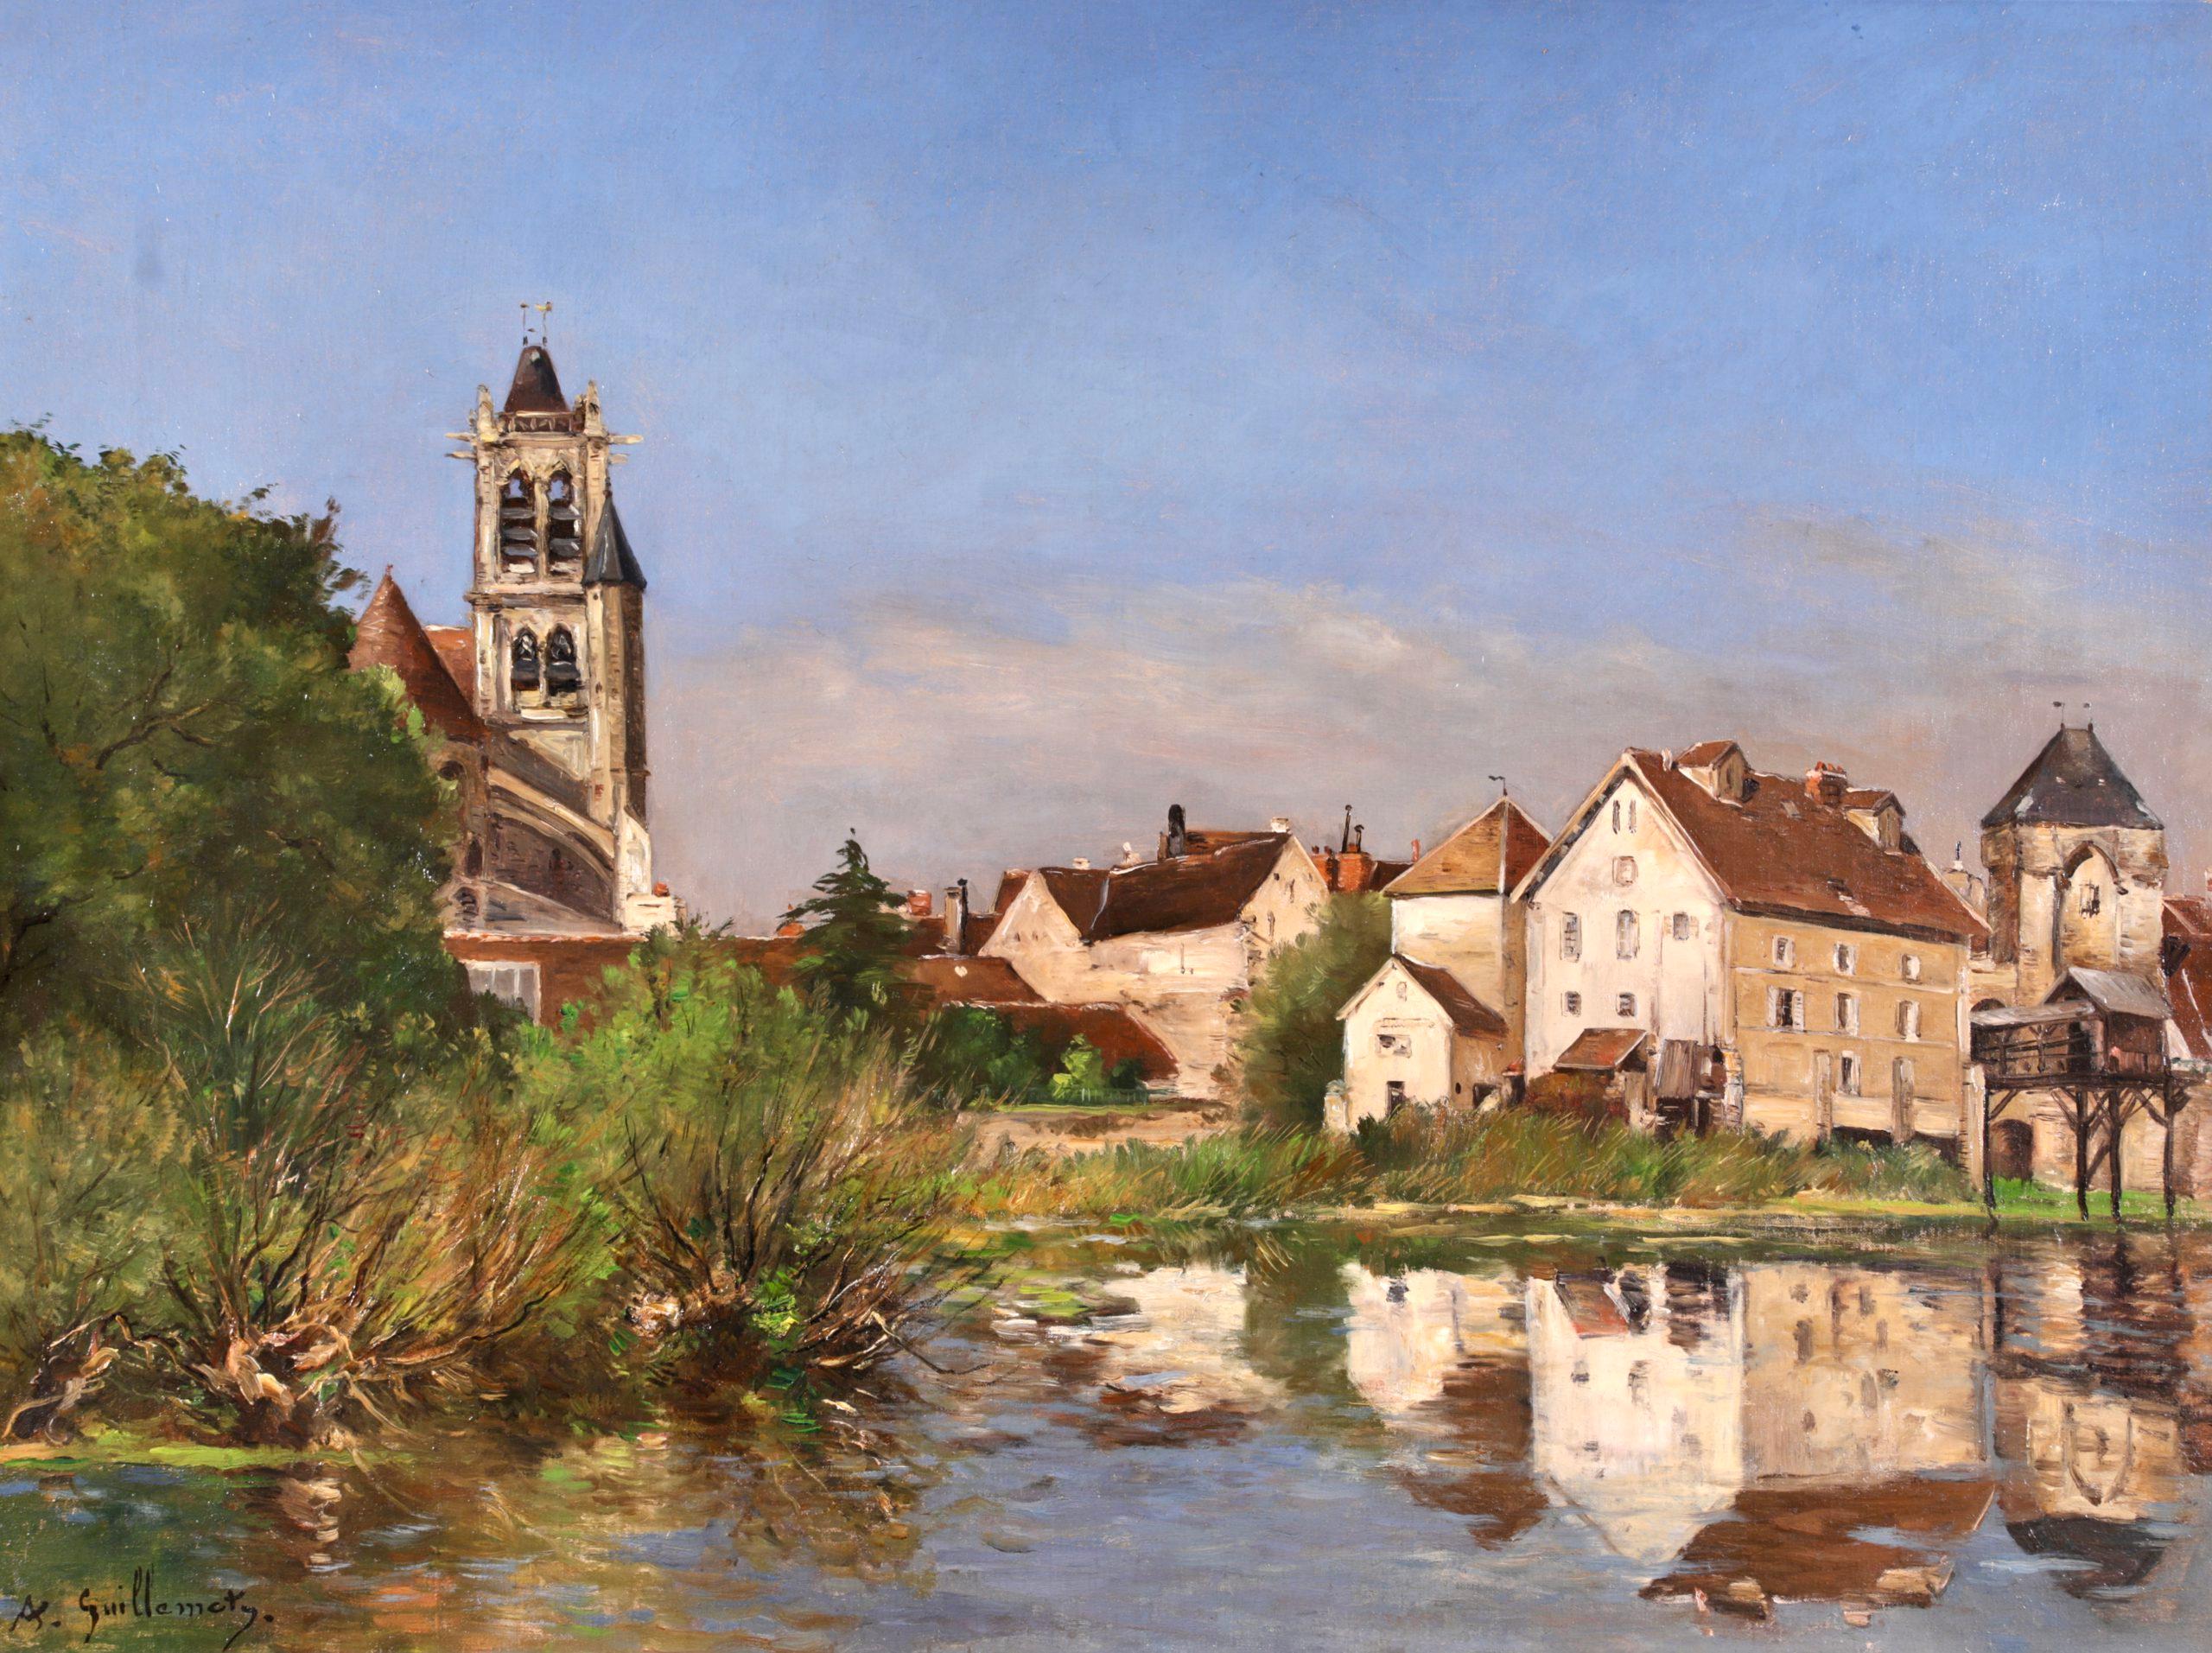 Signed oil on canvas landscape circa 1890 by French impressionist painter Jean Baptiste Antoine Guillemet. The work depicts a view of Moret-sur-Loing in North Eastern France from the bank of the River Loing. The town's buildings are reflecting in